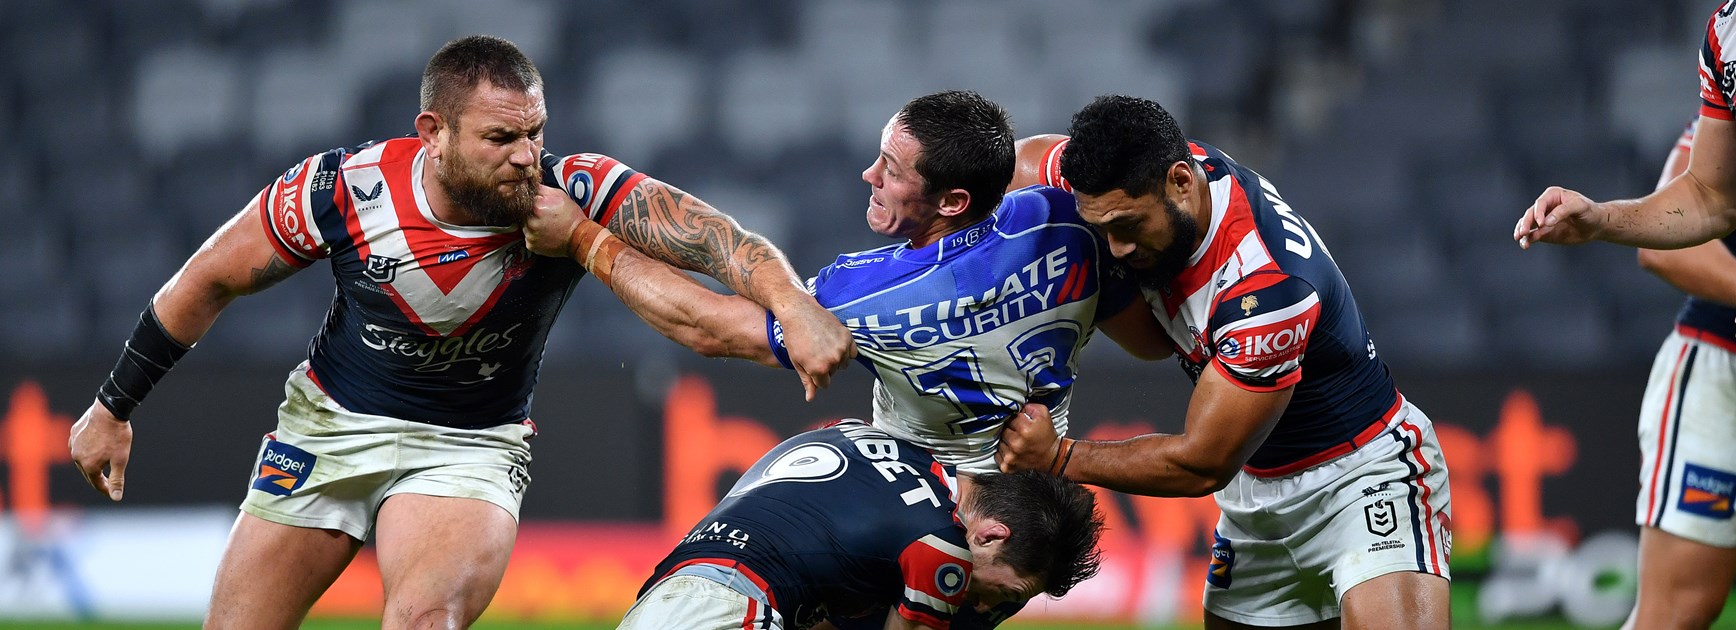 Roosters Hold Off Dogs in Old-Fashioned Scrap